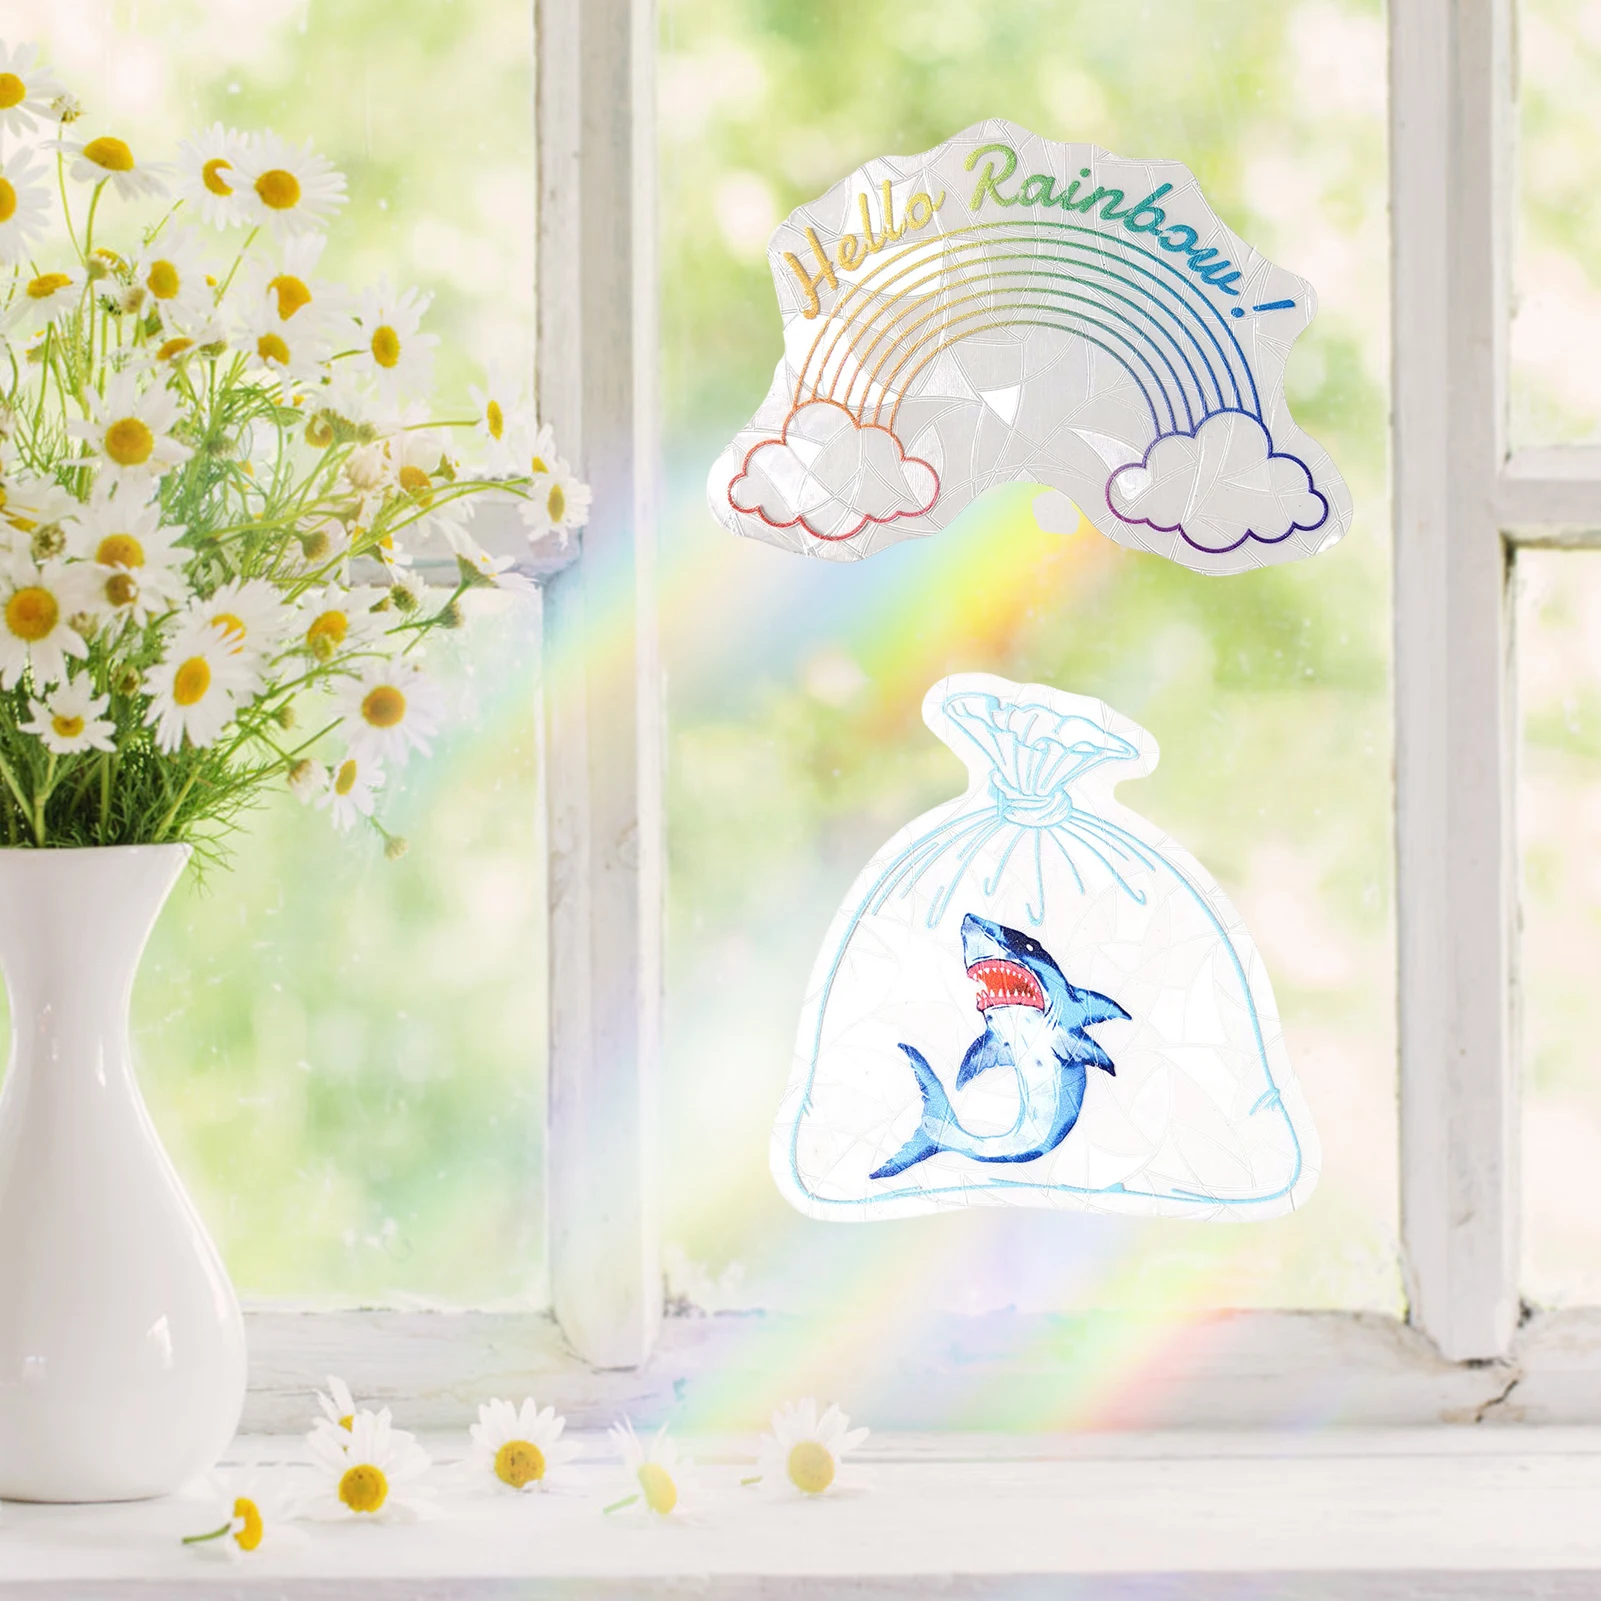 

Sun Catcher Wall Stickers Rainbow Window Mirror Sticker Static Cling Window Clings for Home Bedroom Decoration Rainbow Maker